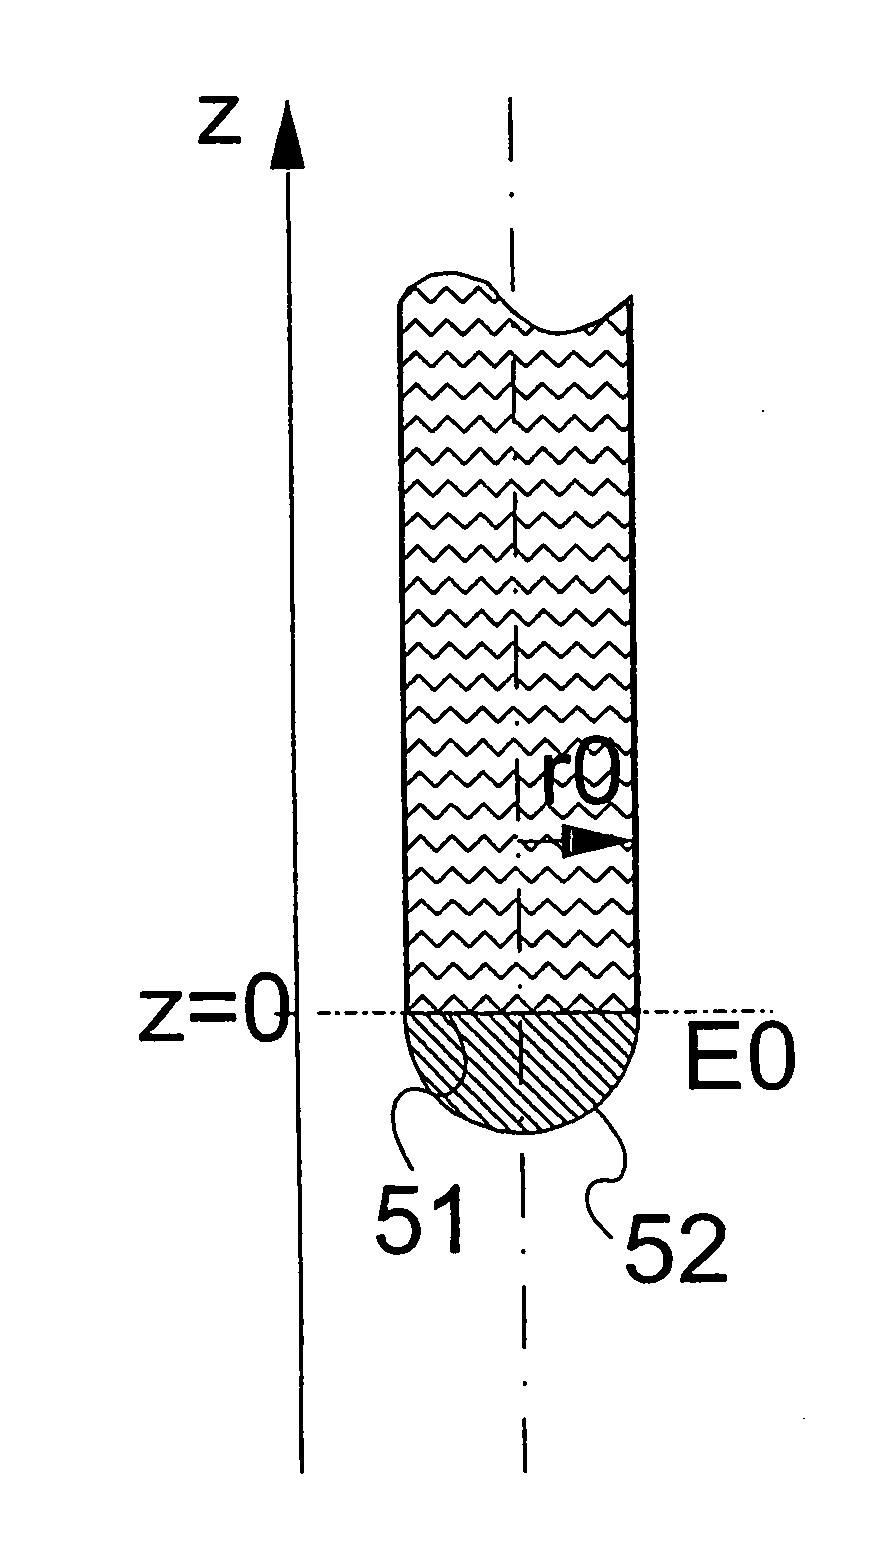 Sample holder for NMR measurements with field homogenization in the sample volume by means of the bordering surfaces of the sample holder